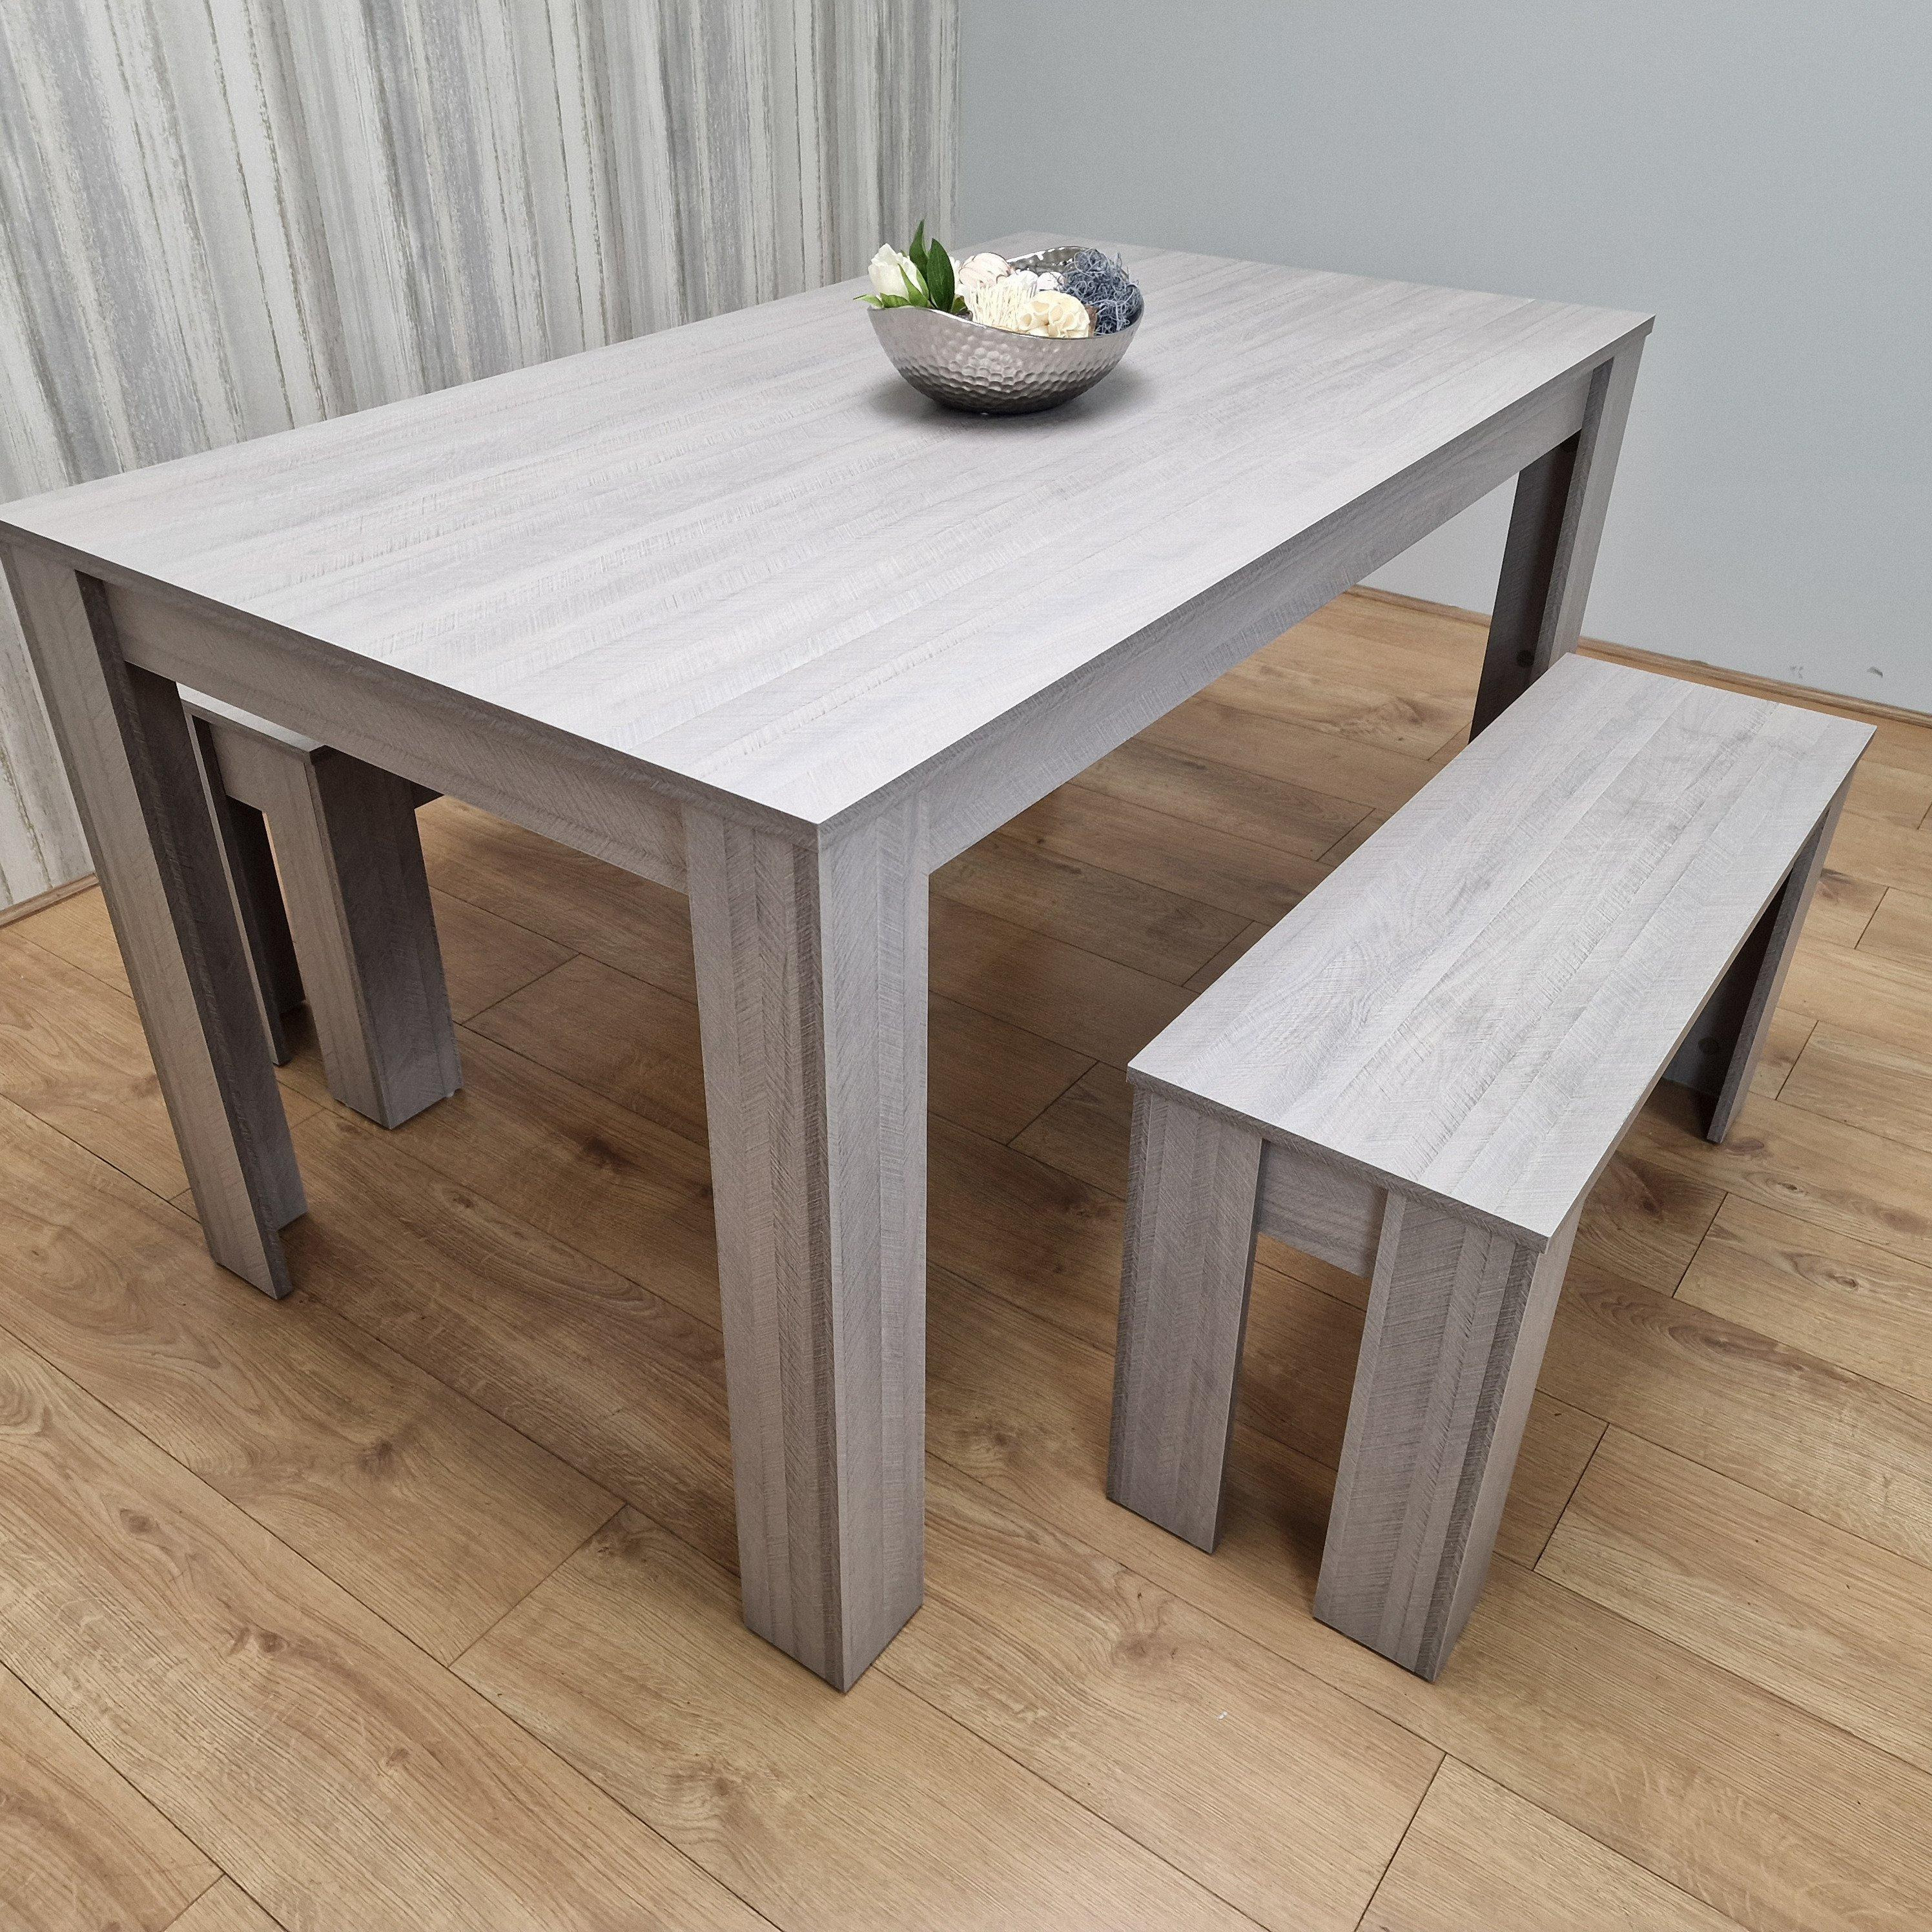 Dining Table set for 4 , Dining Table and 2 Benches , Kitchen Dining Table with 2 Benches , Dining room Table set - image 1